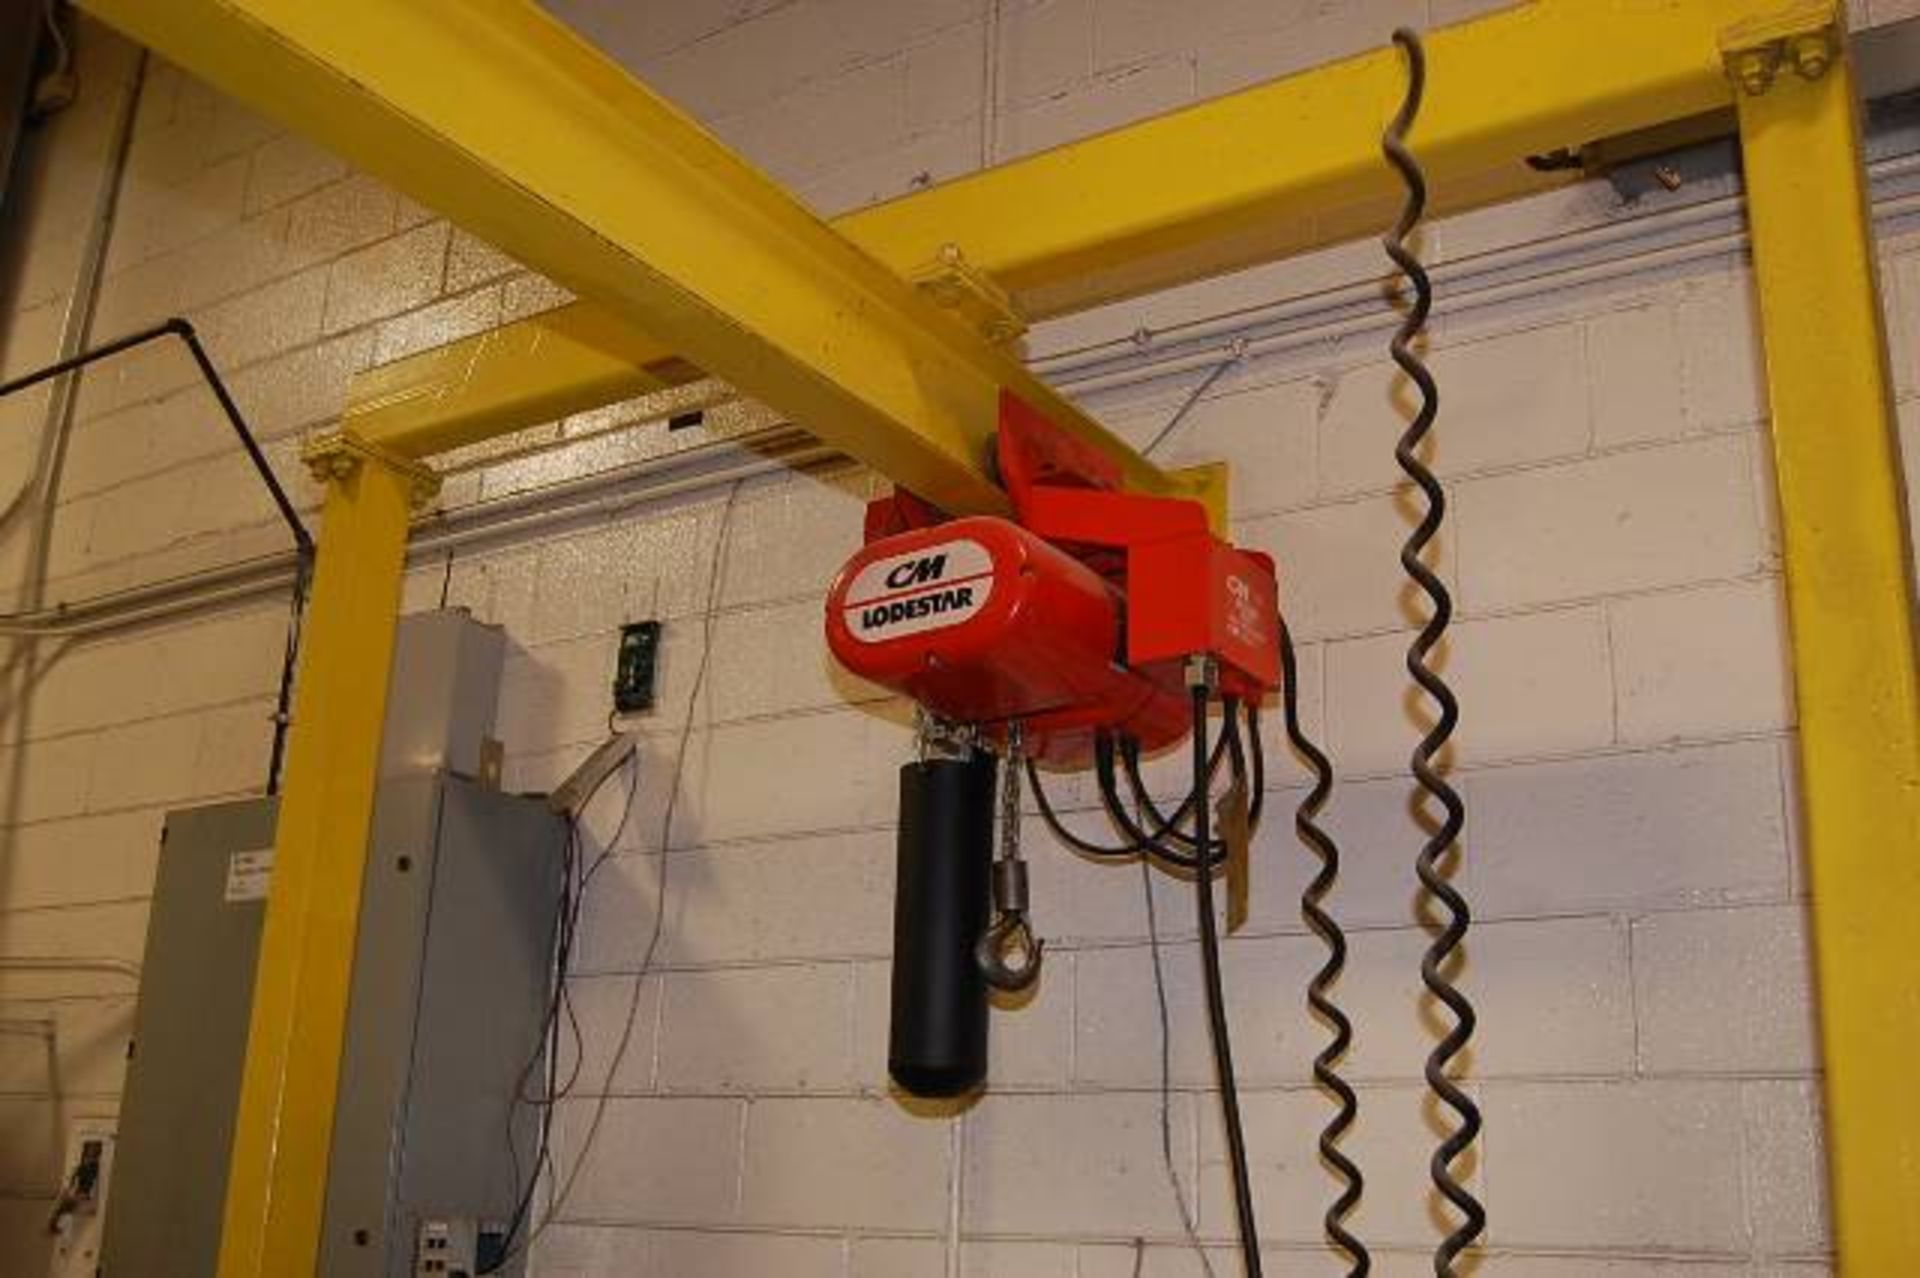 CM Loadstar Electric Chain Hoist, Rated 1-Ton Capacity, Mounted on Self Supporting Rail, 18 ft. - Image 2 of 2